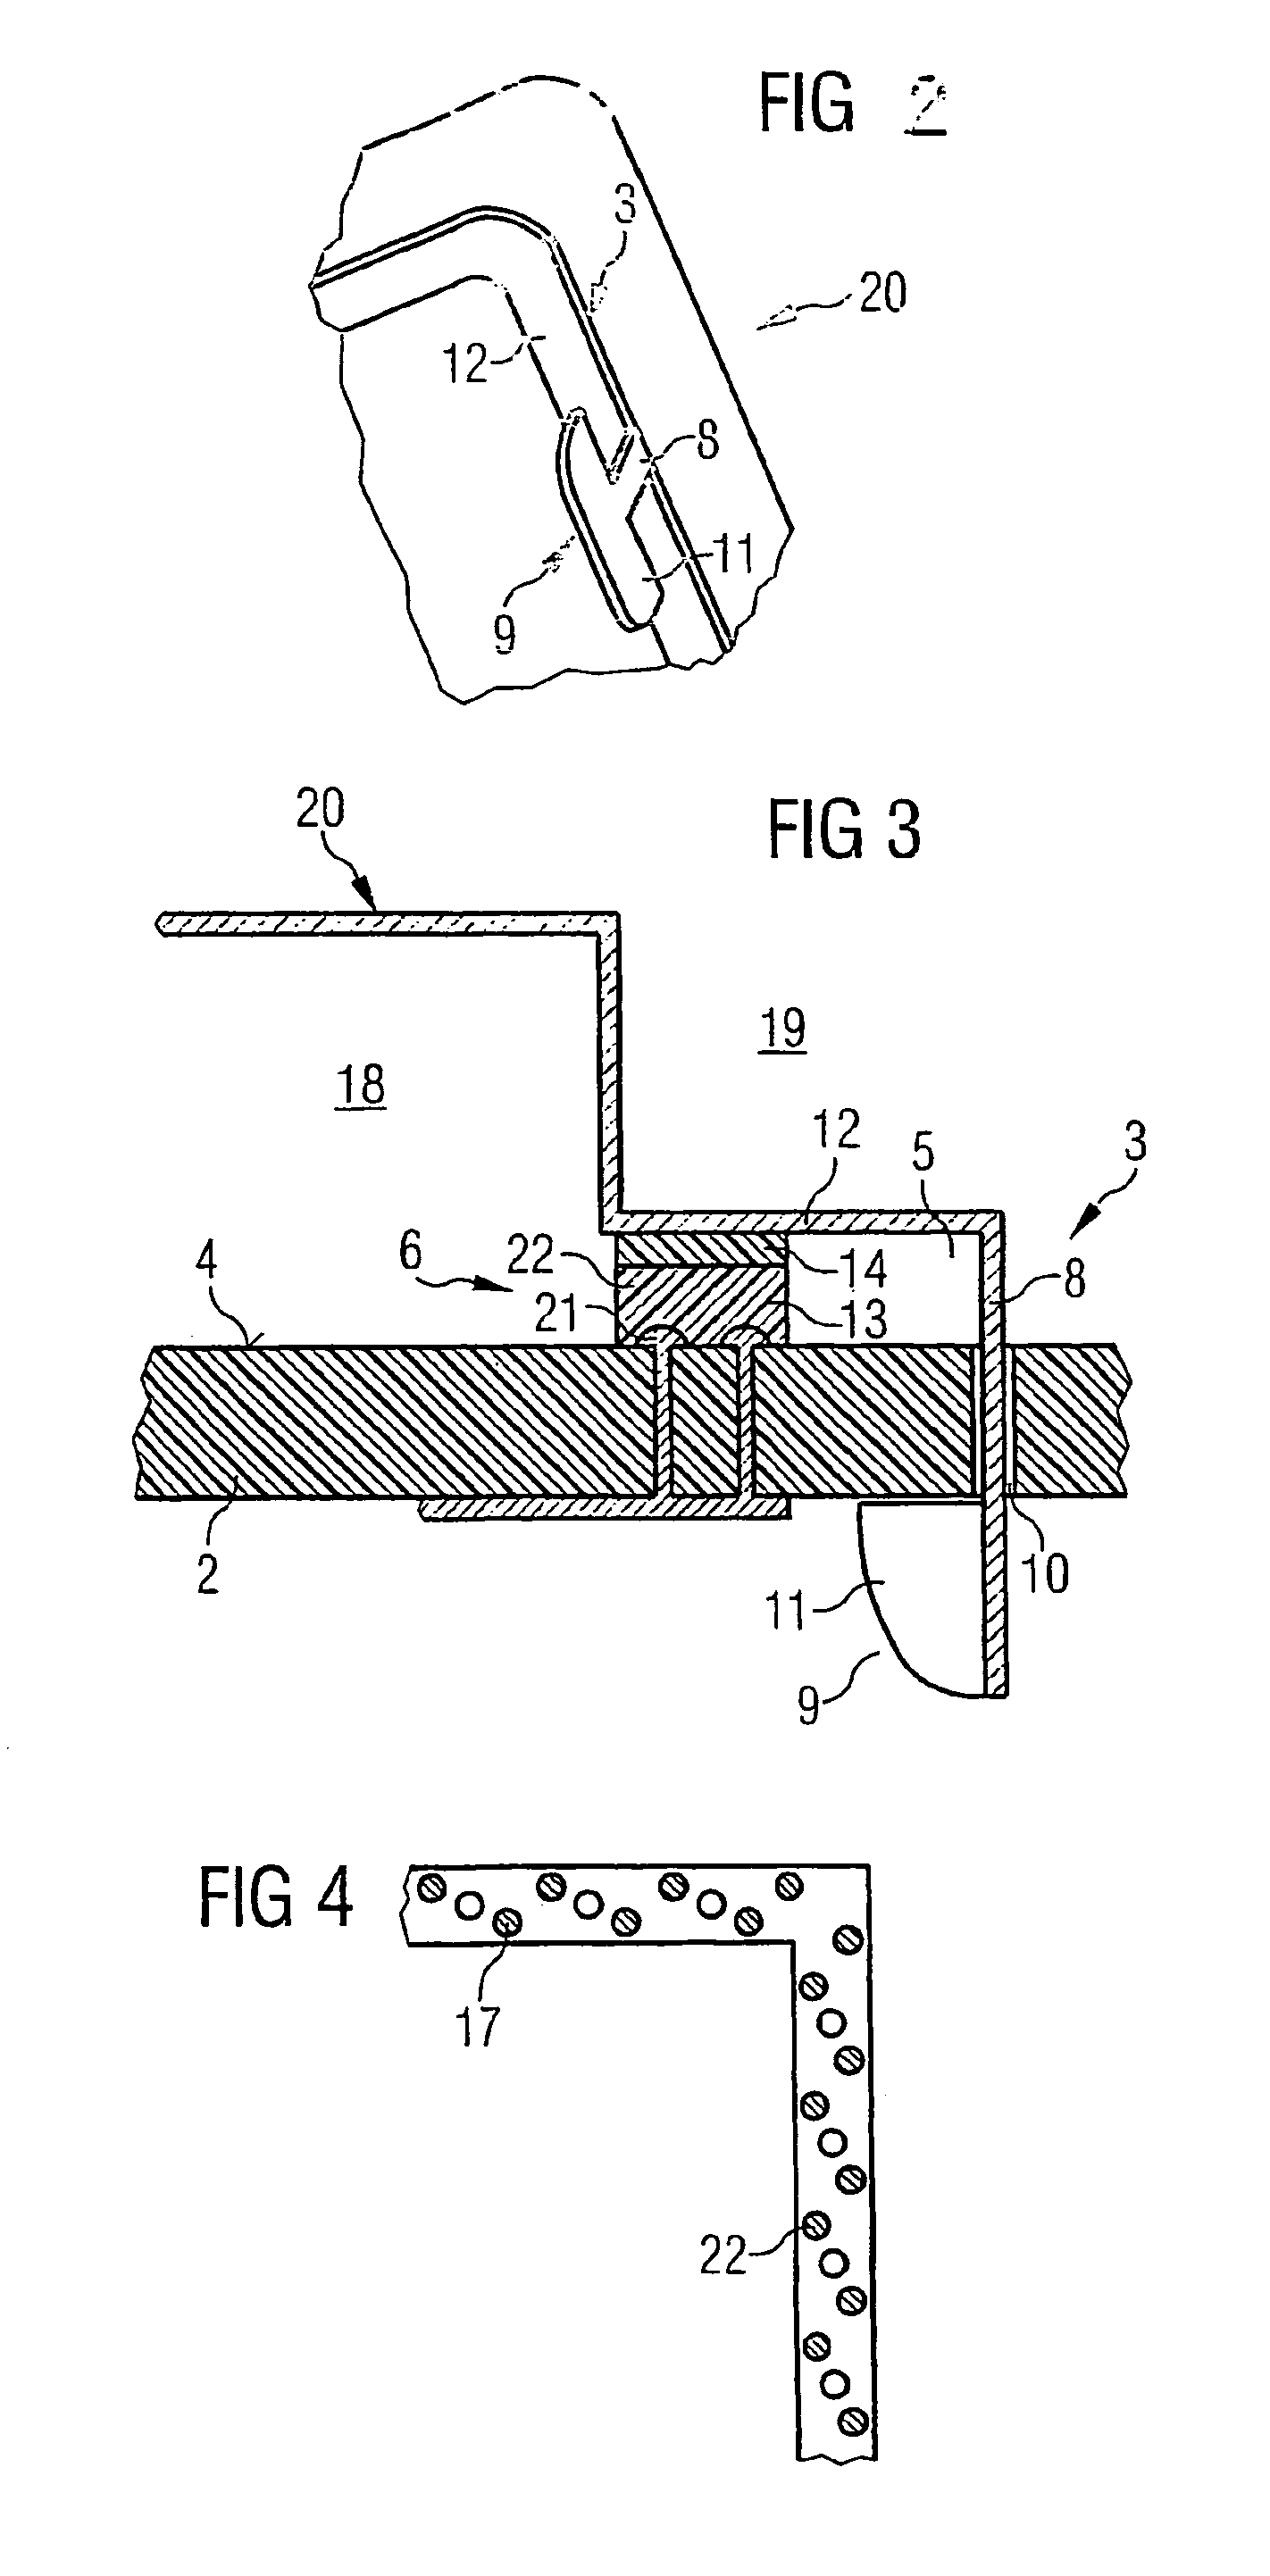 Screening device for electronic subassemblies on a printed circuit board